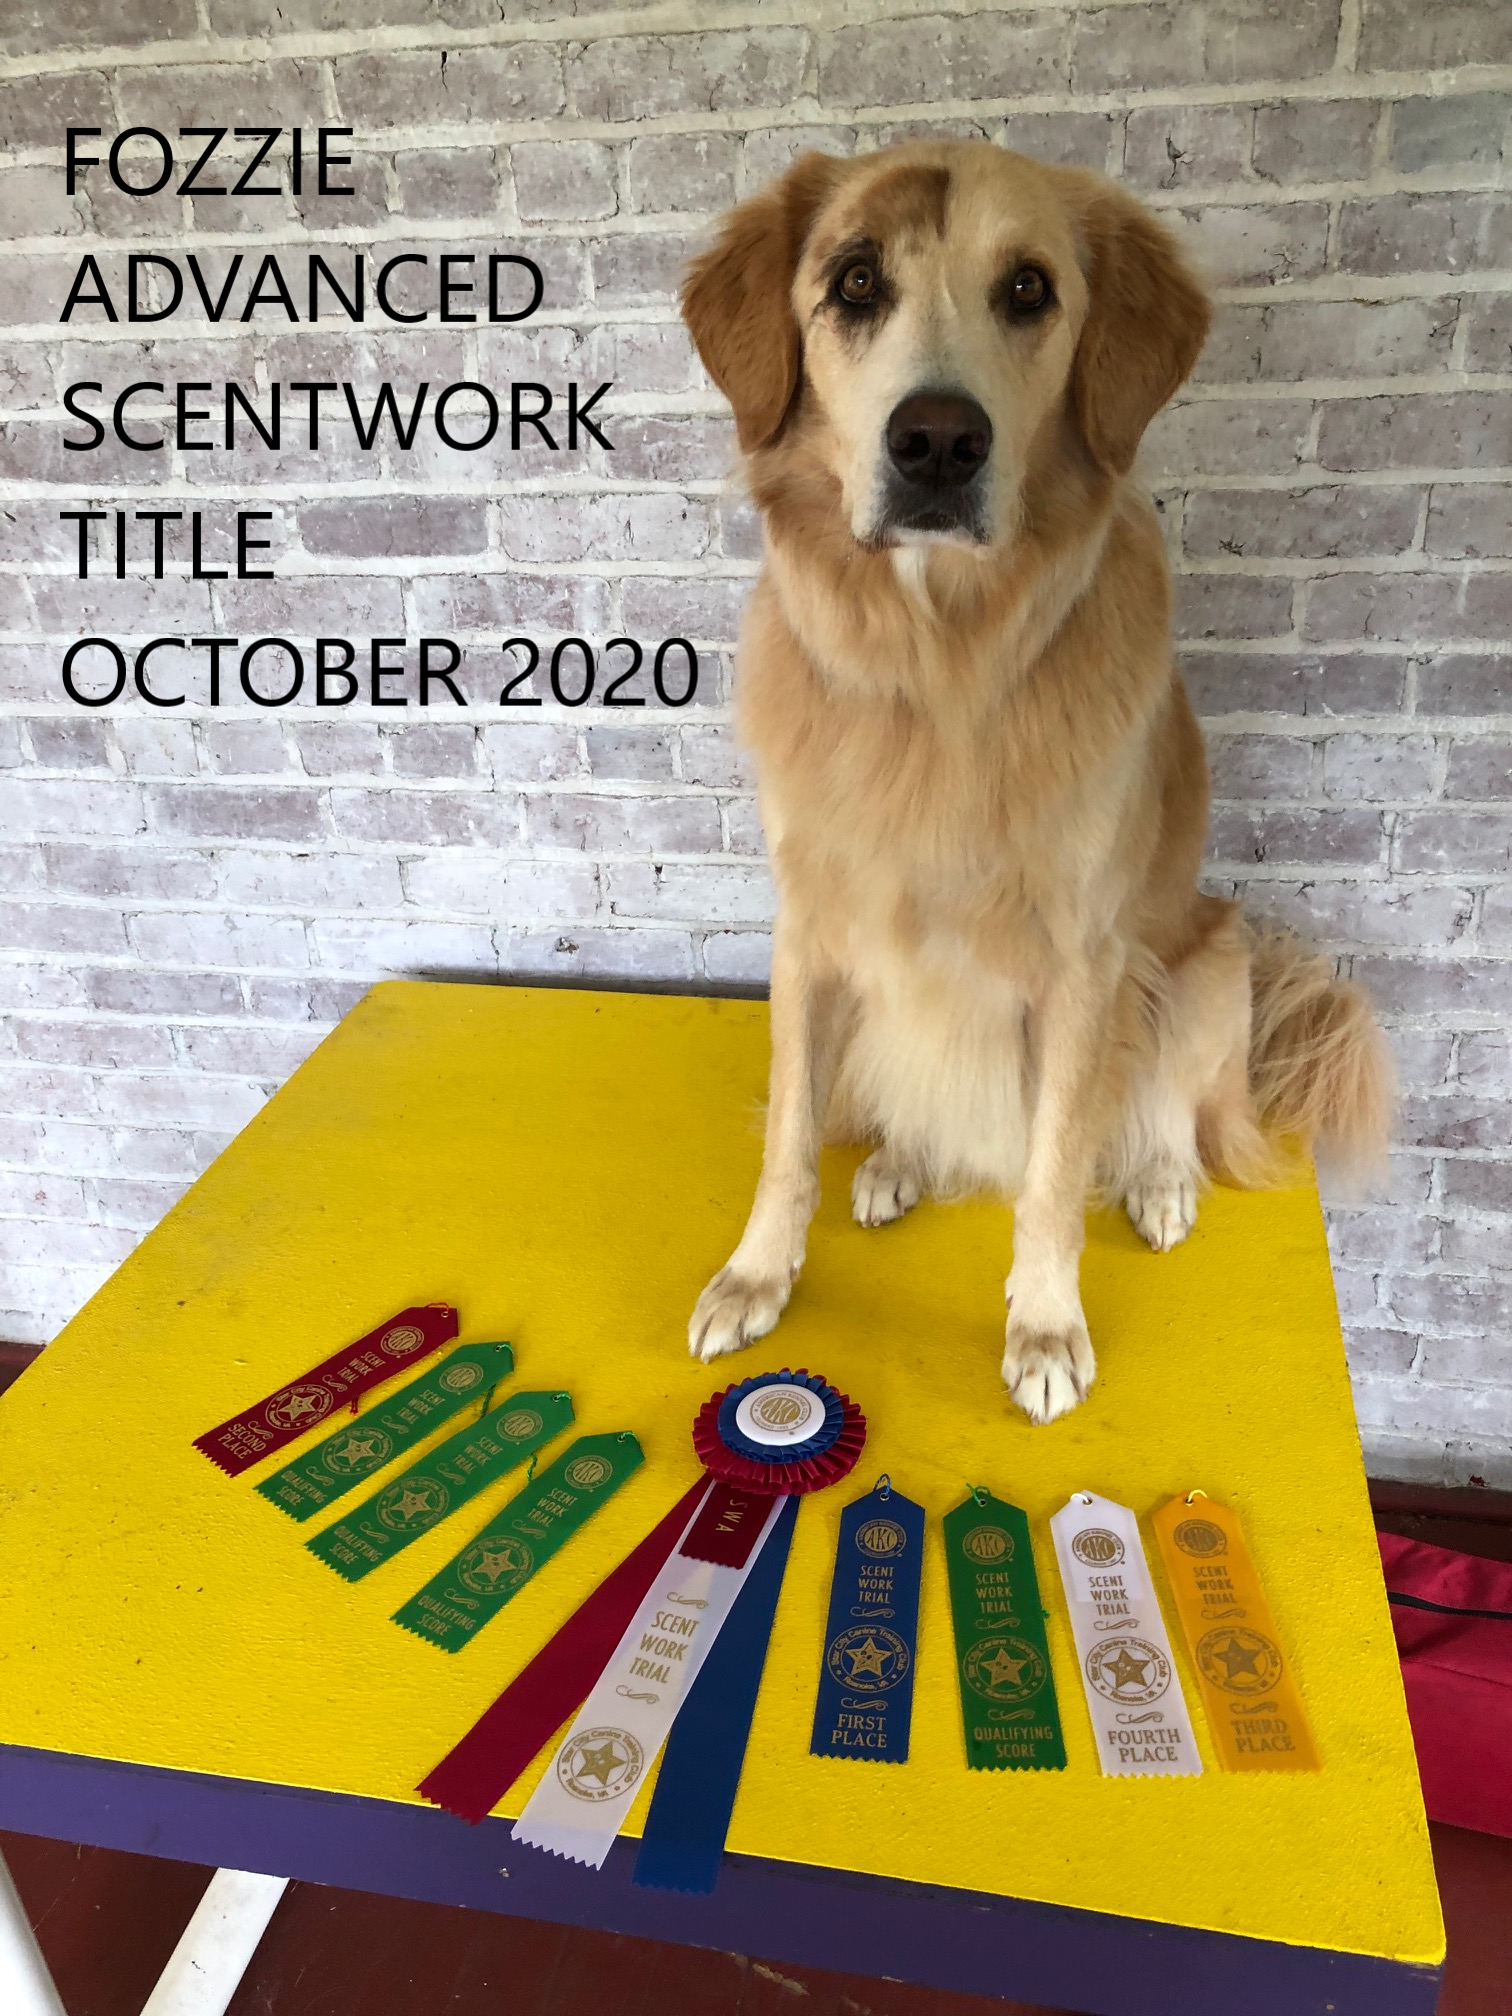 Fozzie Advanced Scentwork Title Oct 2020.png